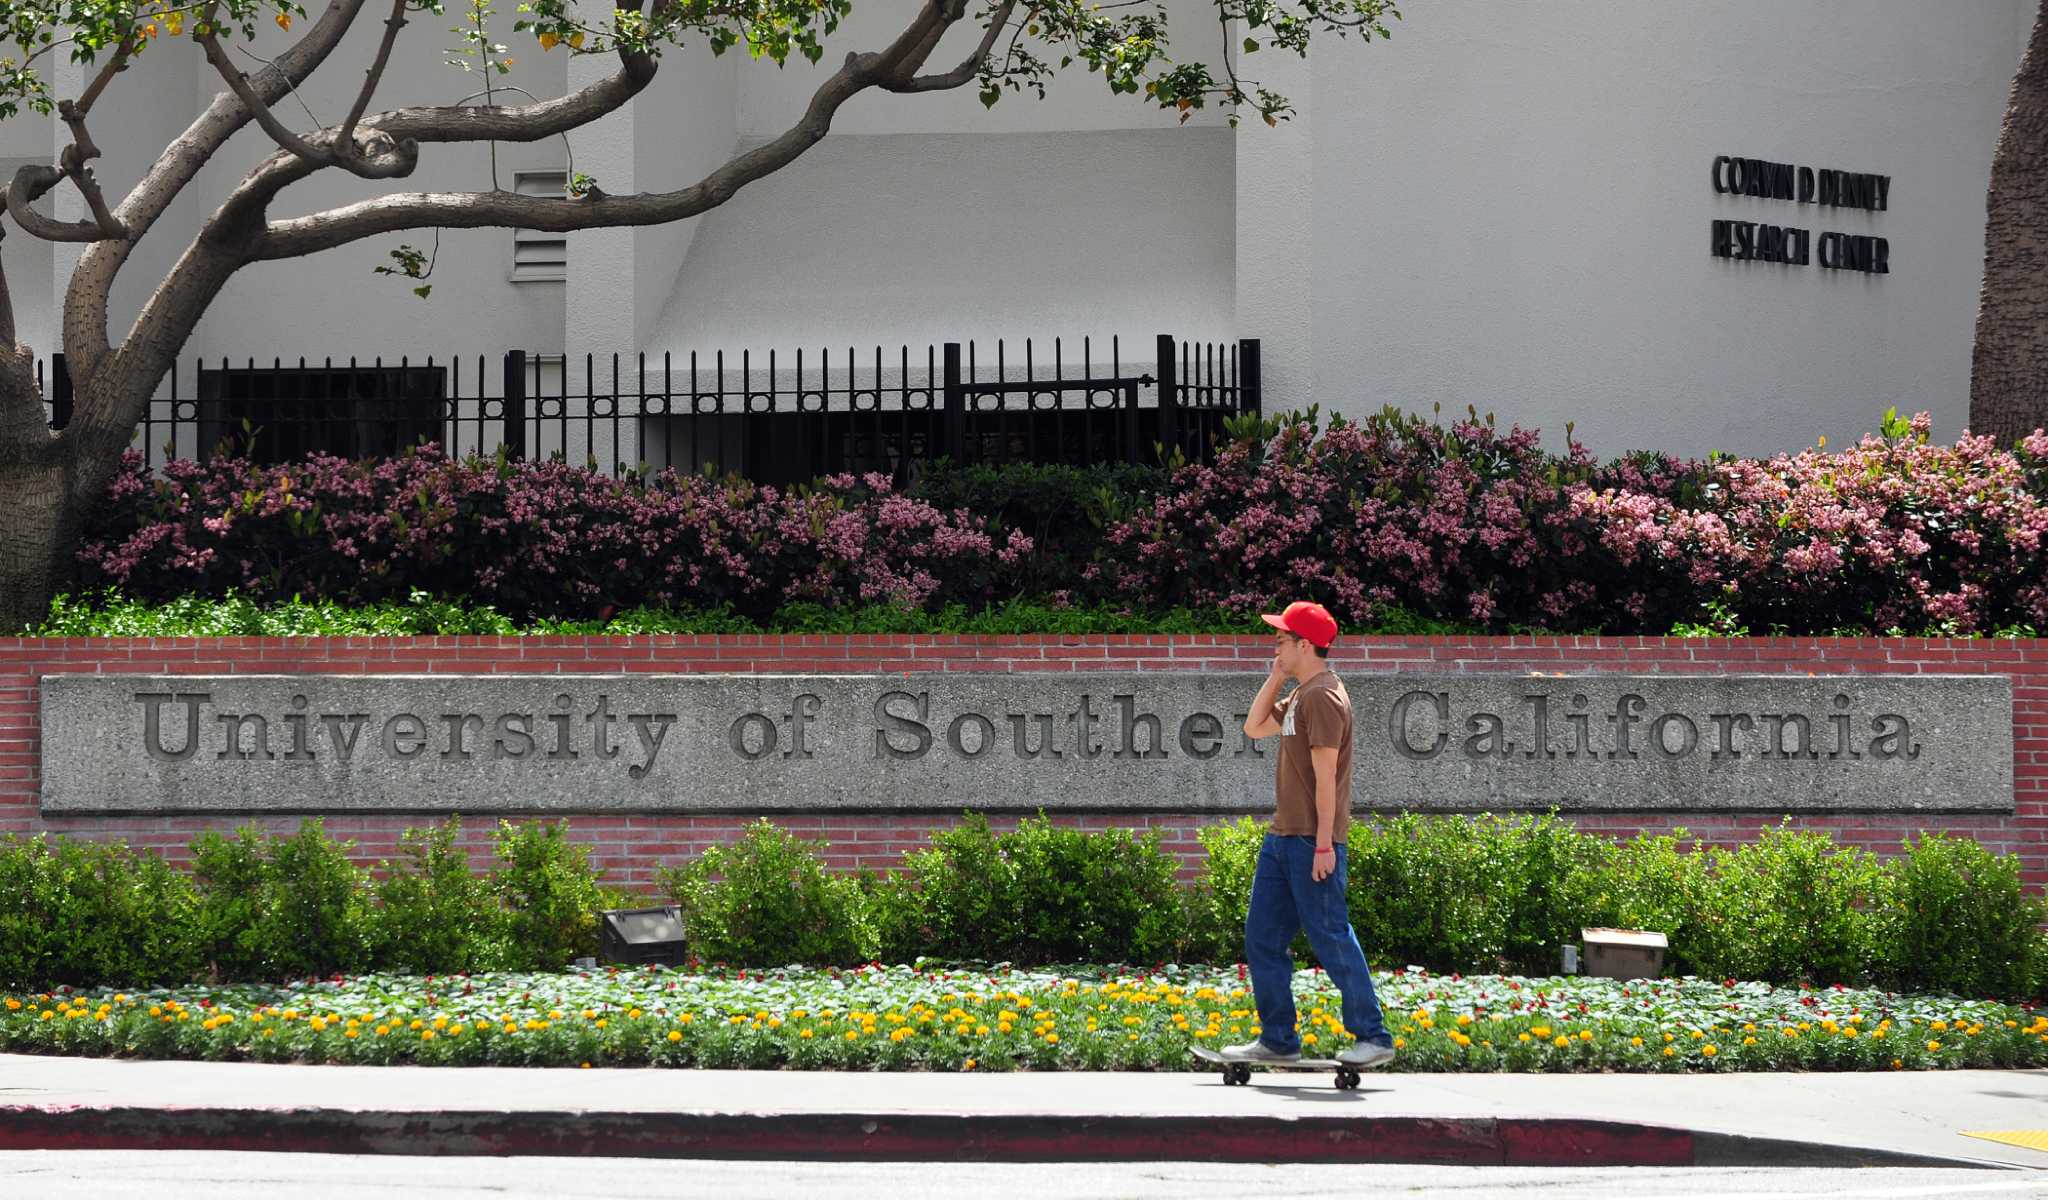 Professor fatally stabbed on USC campus, student arrested - San Francisco Chronicle